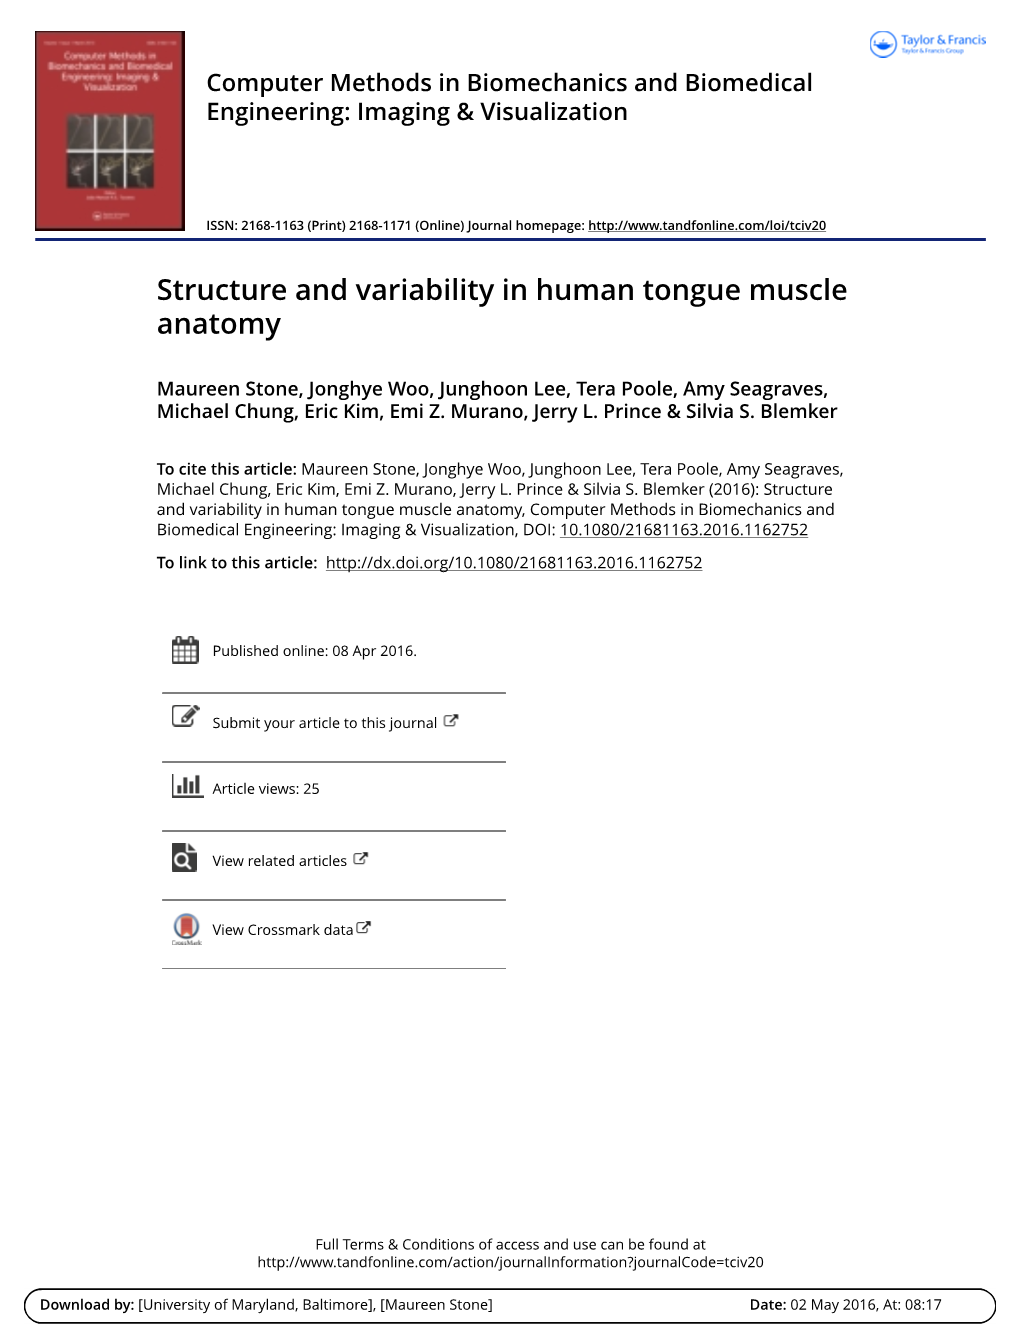 Structure and Variability in Human Tongue Muscle Anatomy